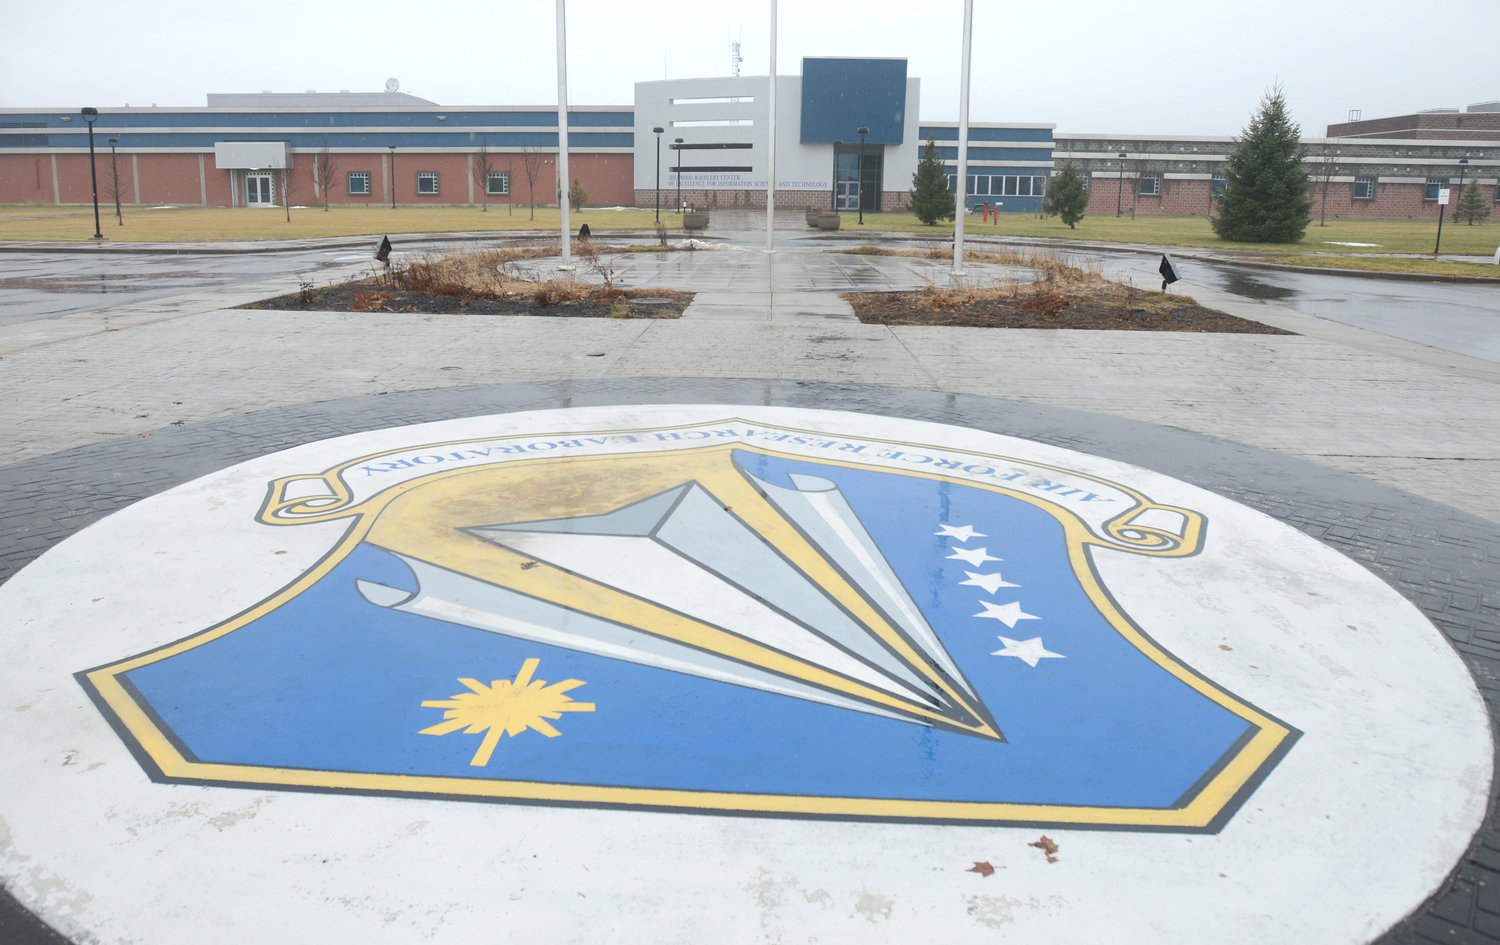 NEW PERIMETER — Construction could begin this week on a new perimeter security system at the Air Force Research Laboratory’s Rome facility at Griffiss park, whose entrance is shown here, in this file photo.